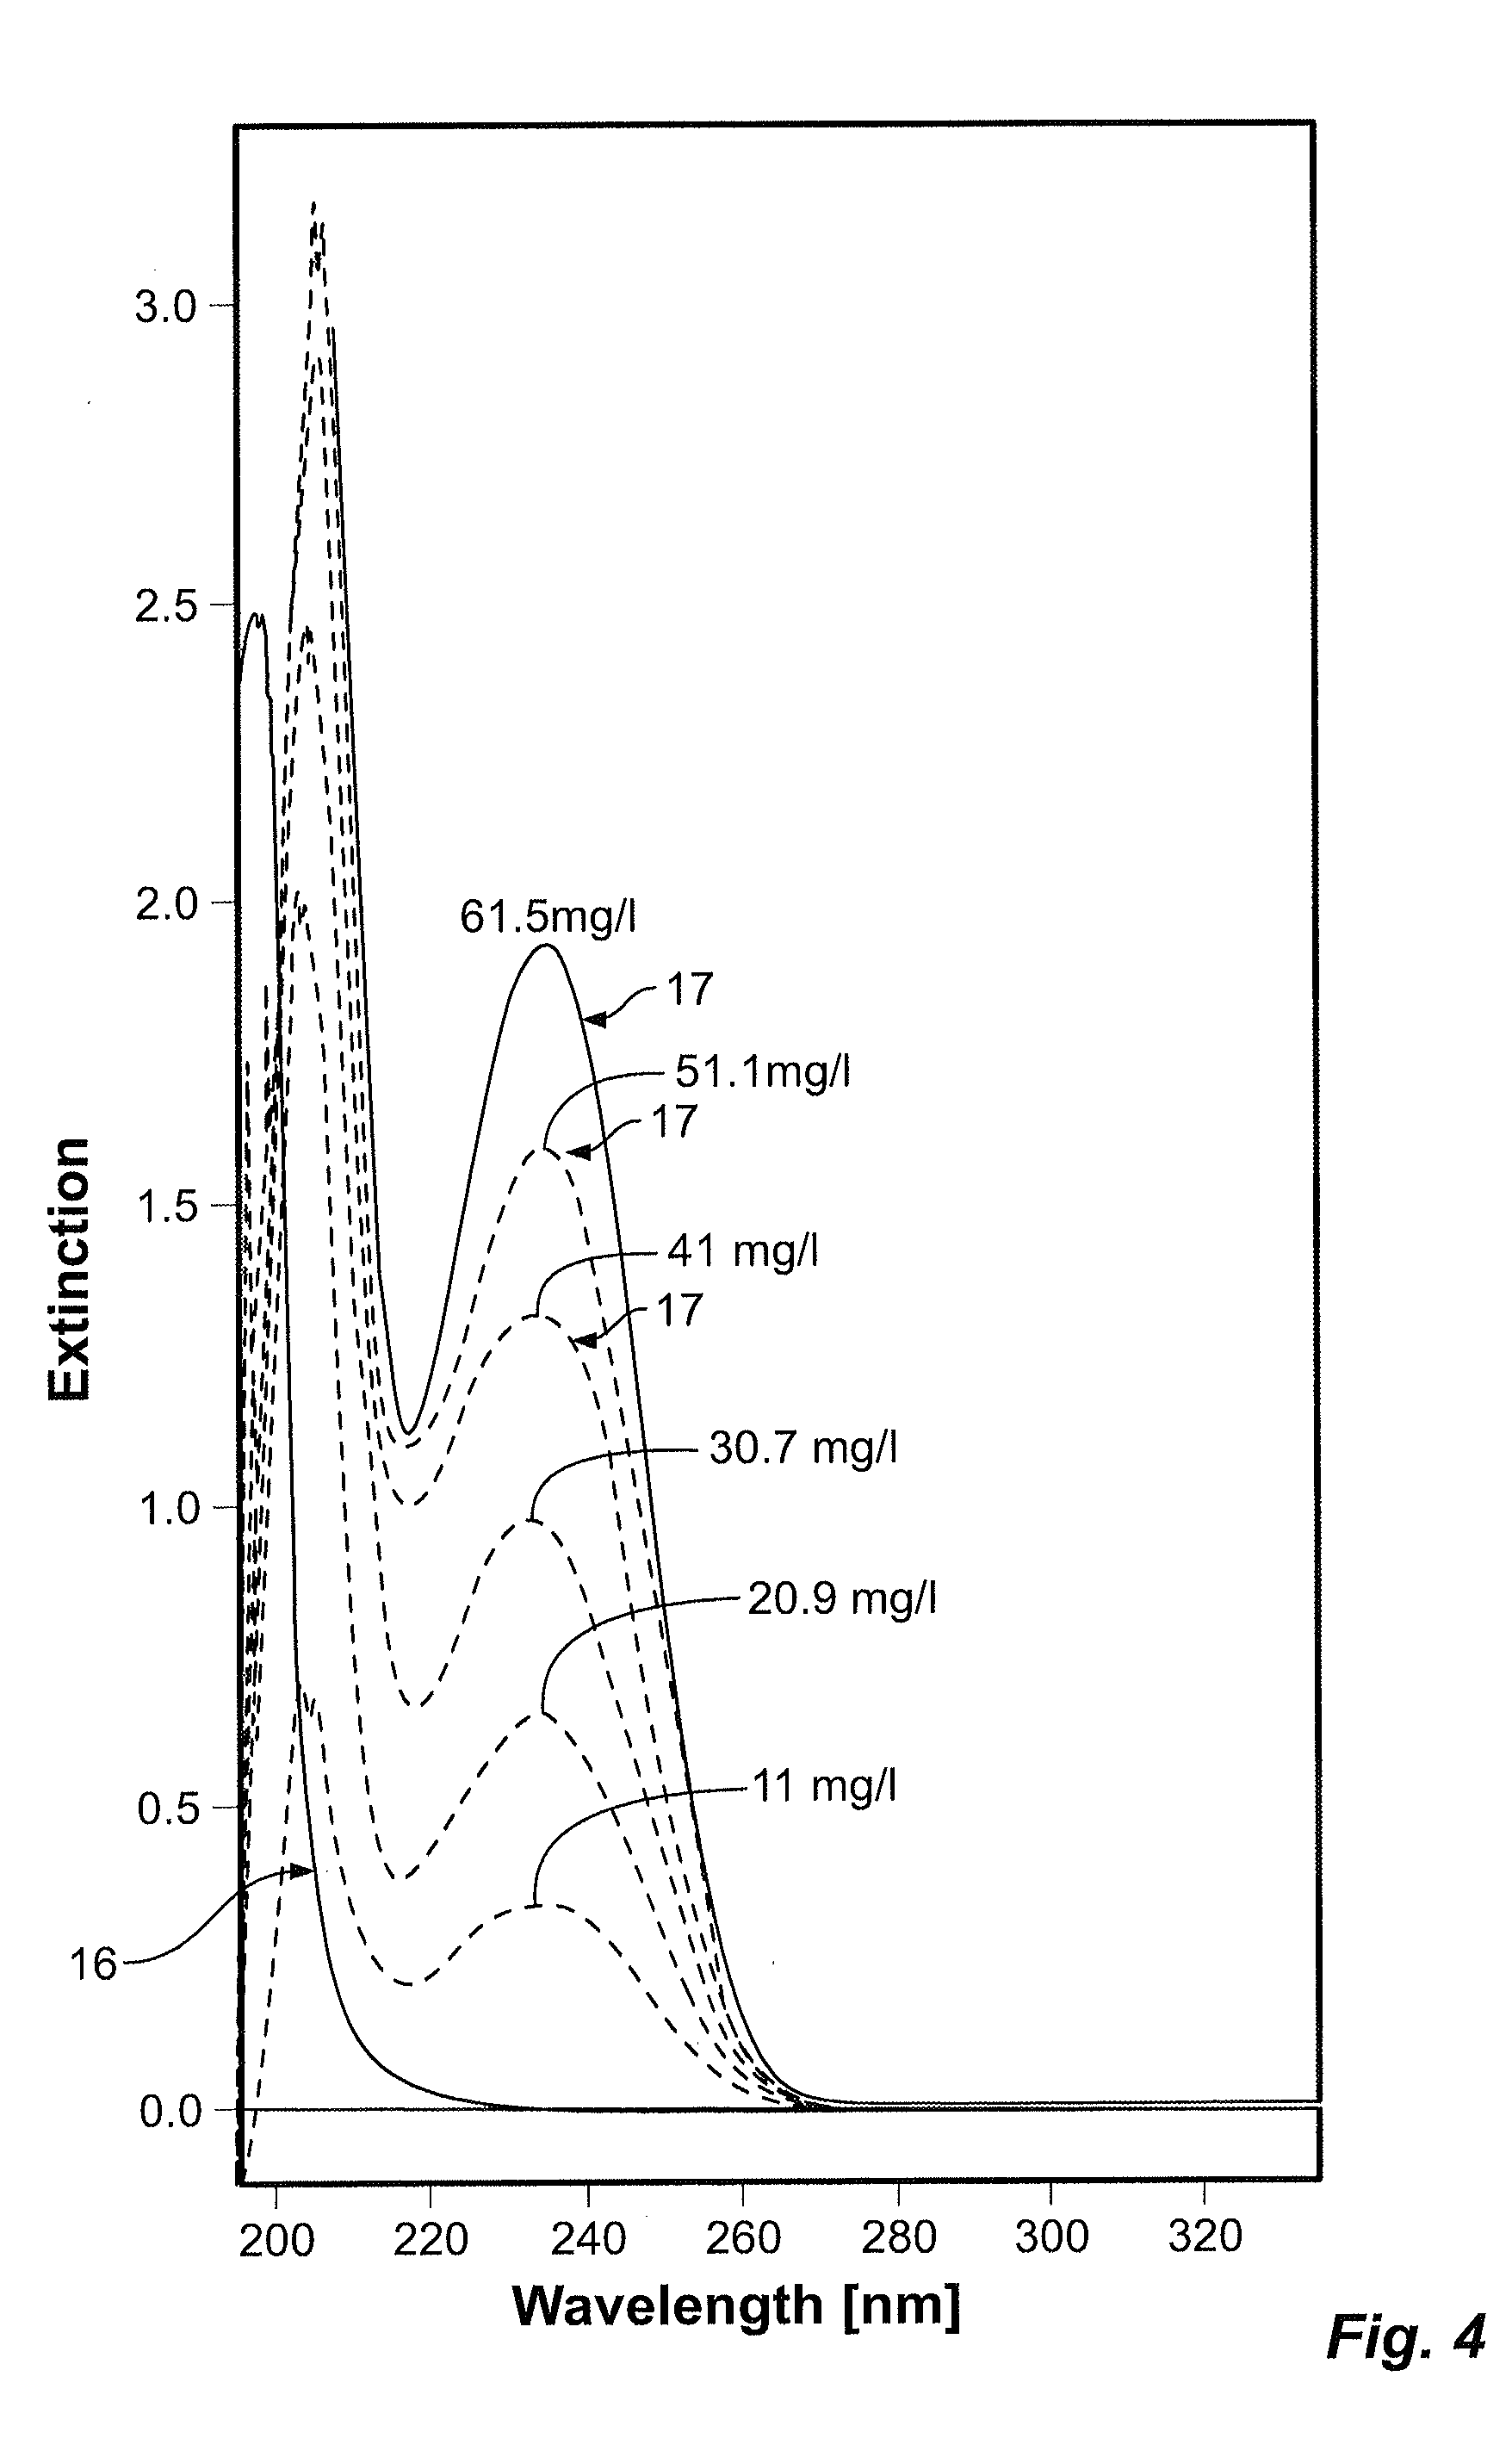 Apparatus and apparatus control method for the quantitative concentration determination of selected substances filtered out of a patient's body in a fluid